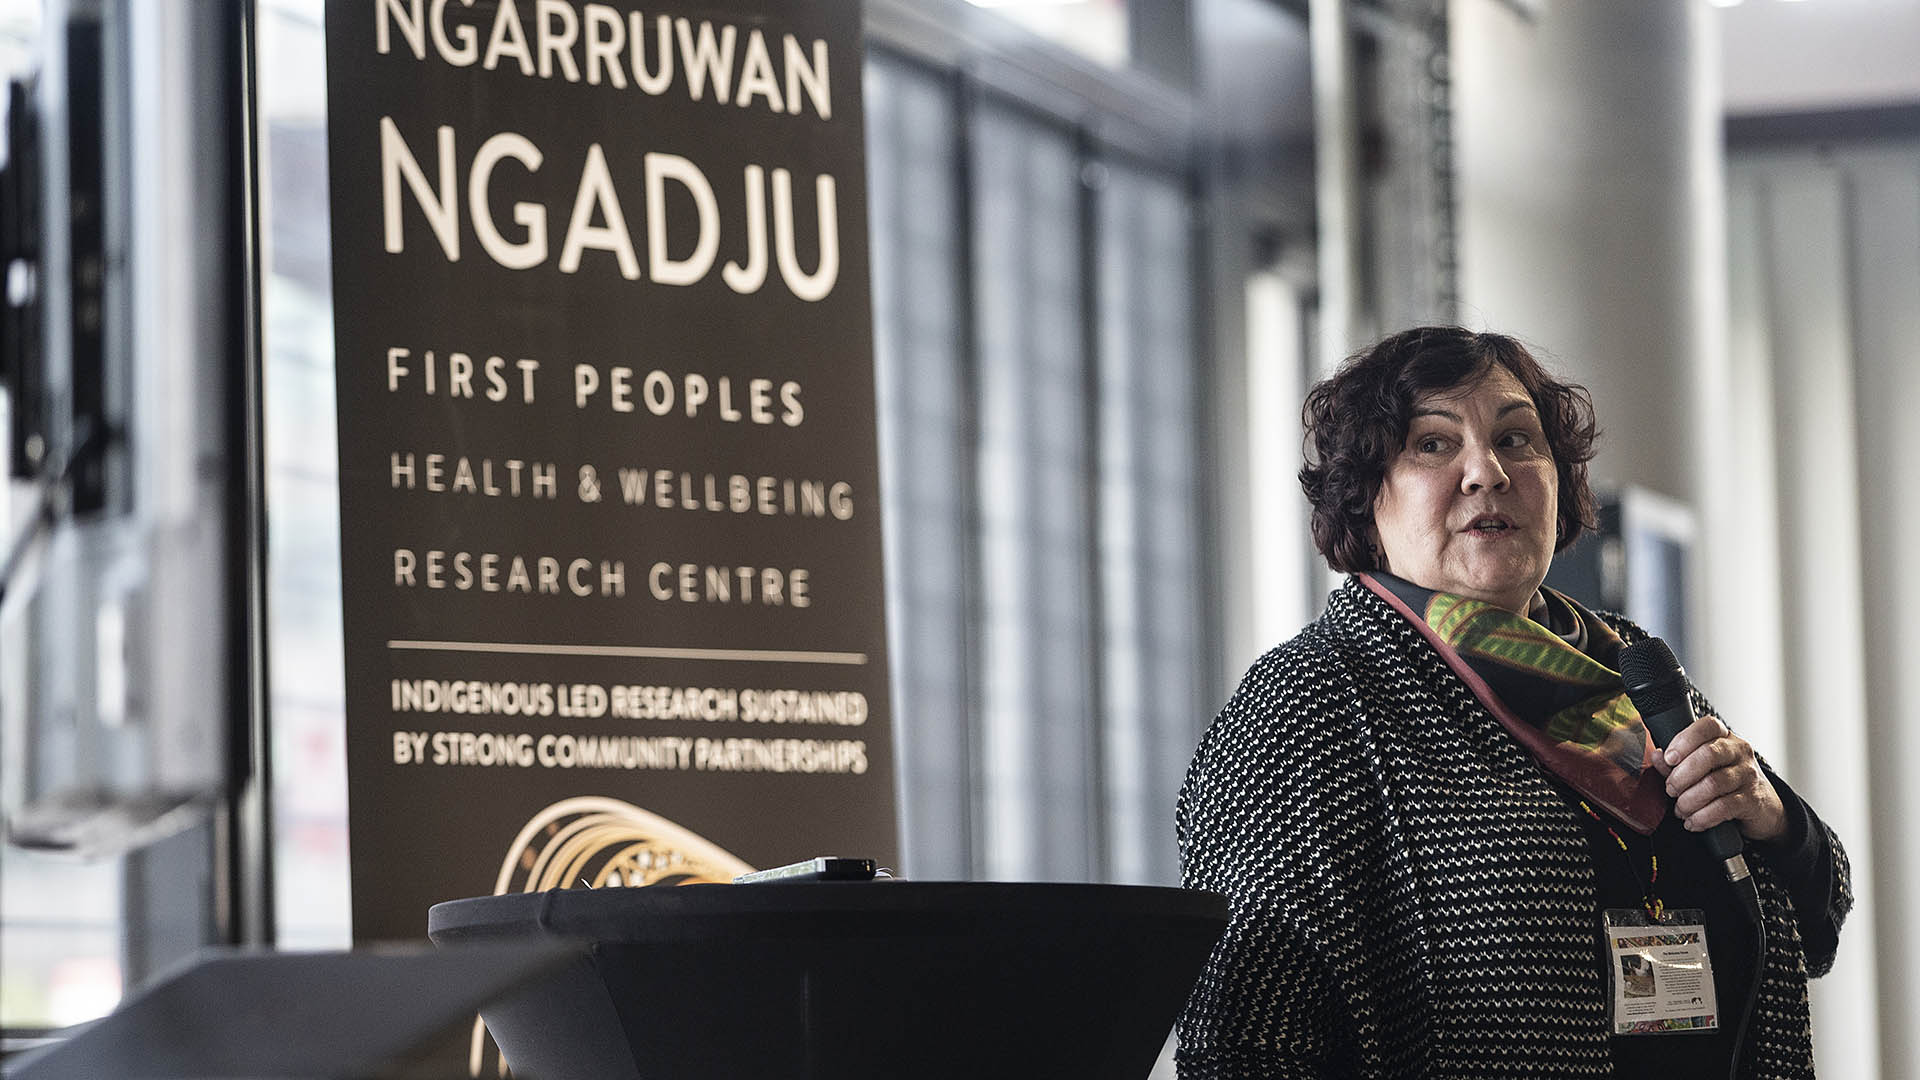 Professor Kathleen Clapham, founding Director of the Ngarruwan Ngadju: First People’s Health and Wellbeing Research Centre based within the Australian Health Services Research Institute at the University of Wollongong (UOW)